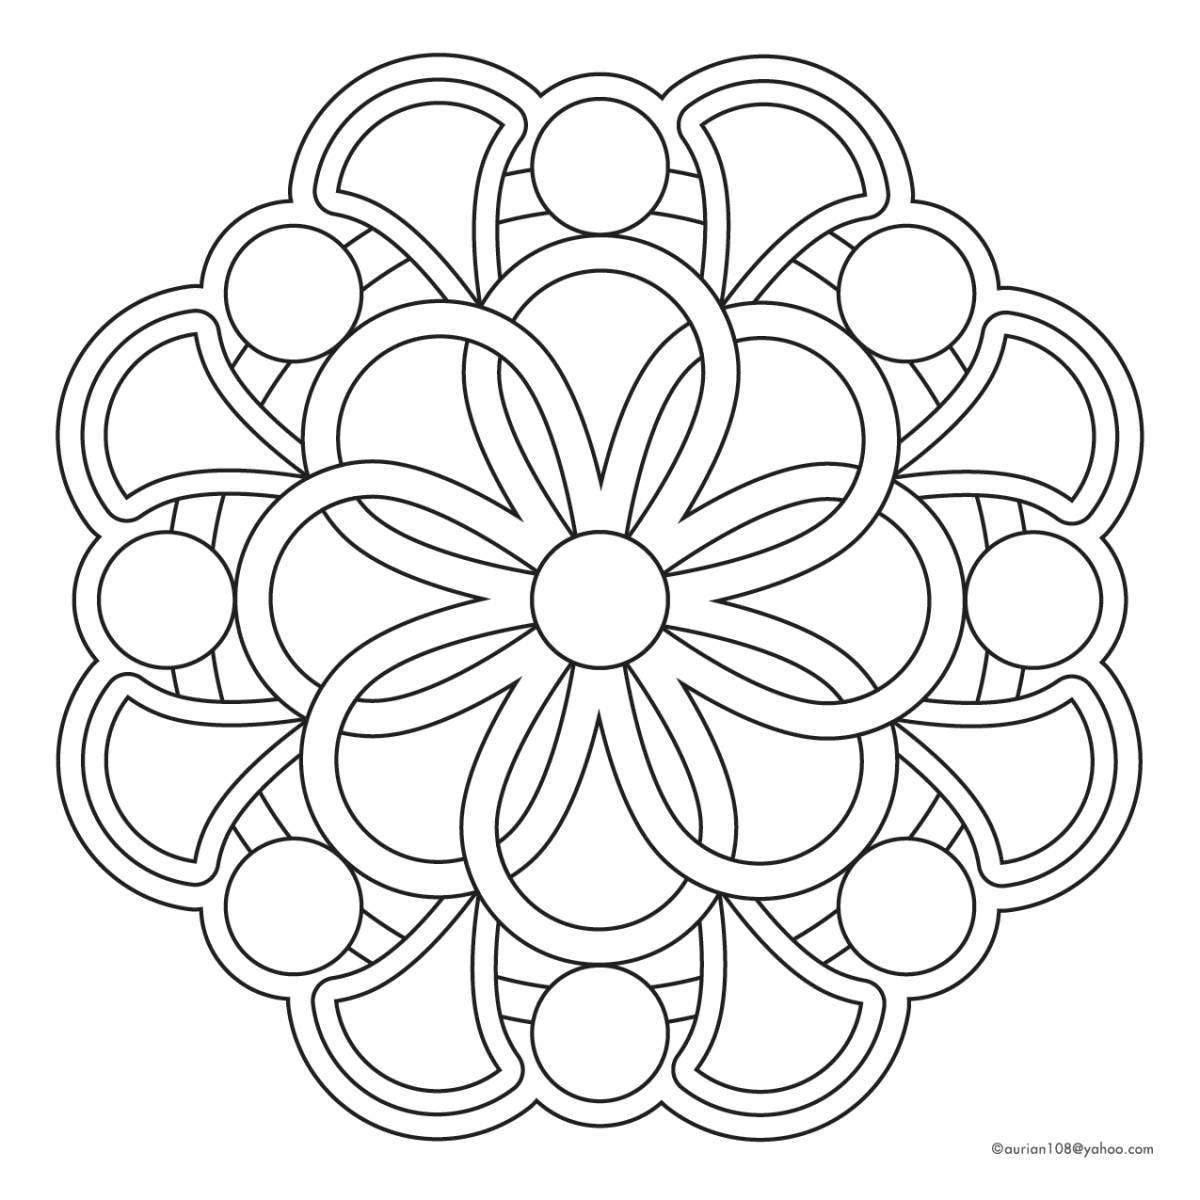 Creative coloring pages for kids